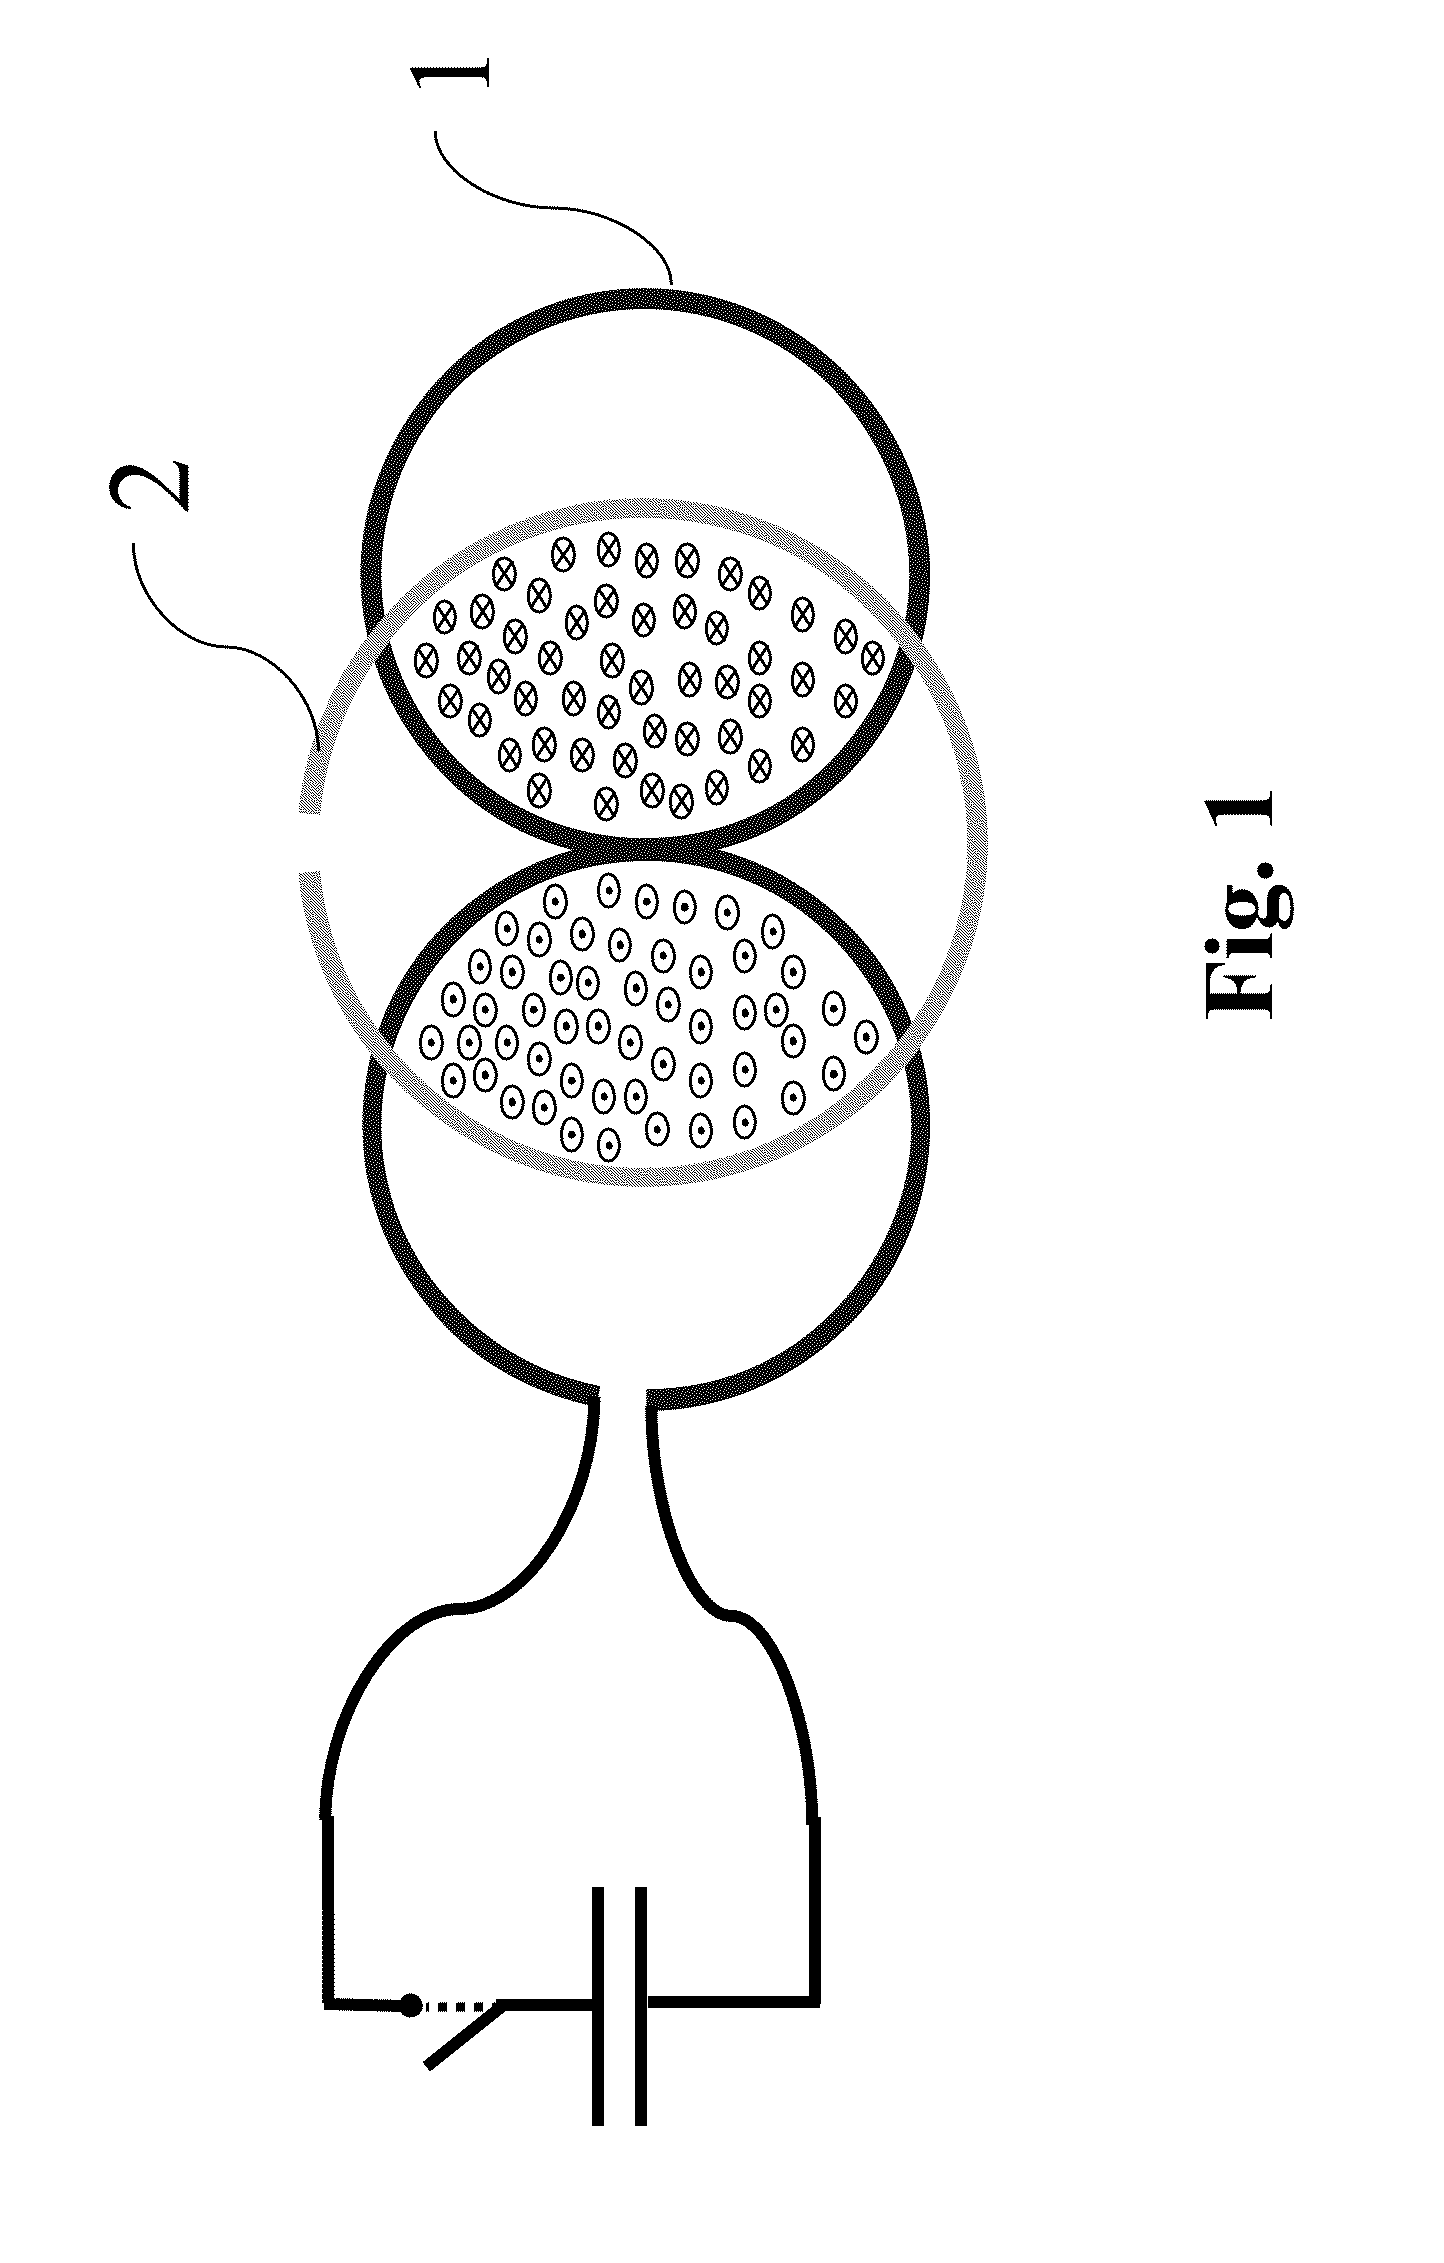 Magnetic stimulation coils with electrically conducting structures